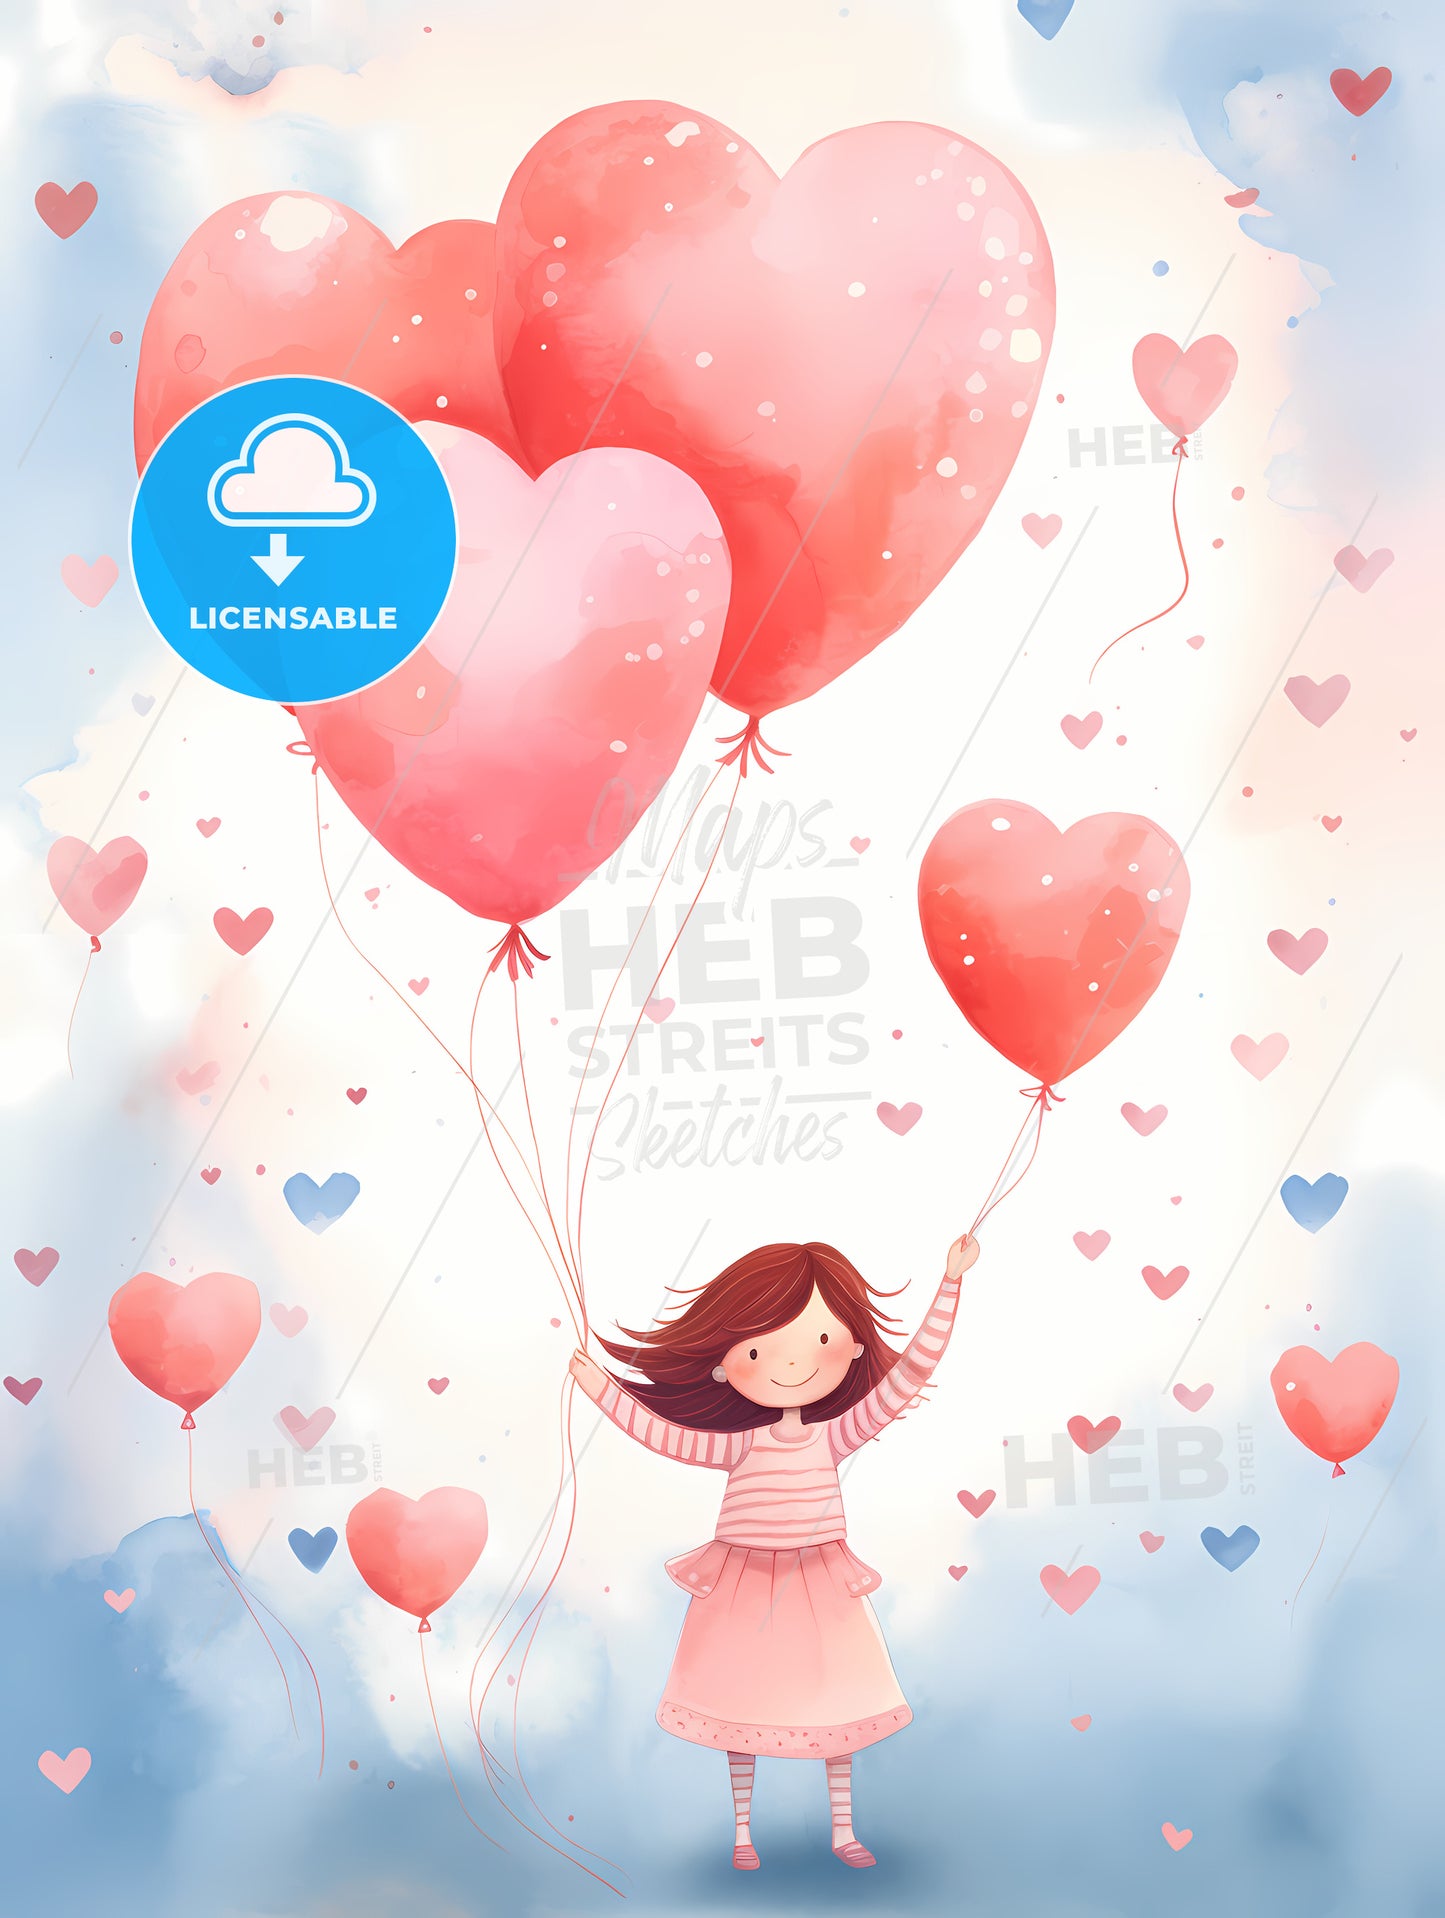 A Girl Holding Balloons In The Air